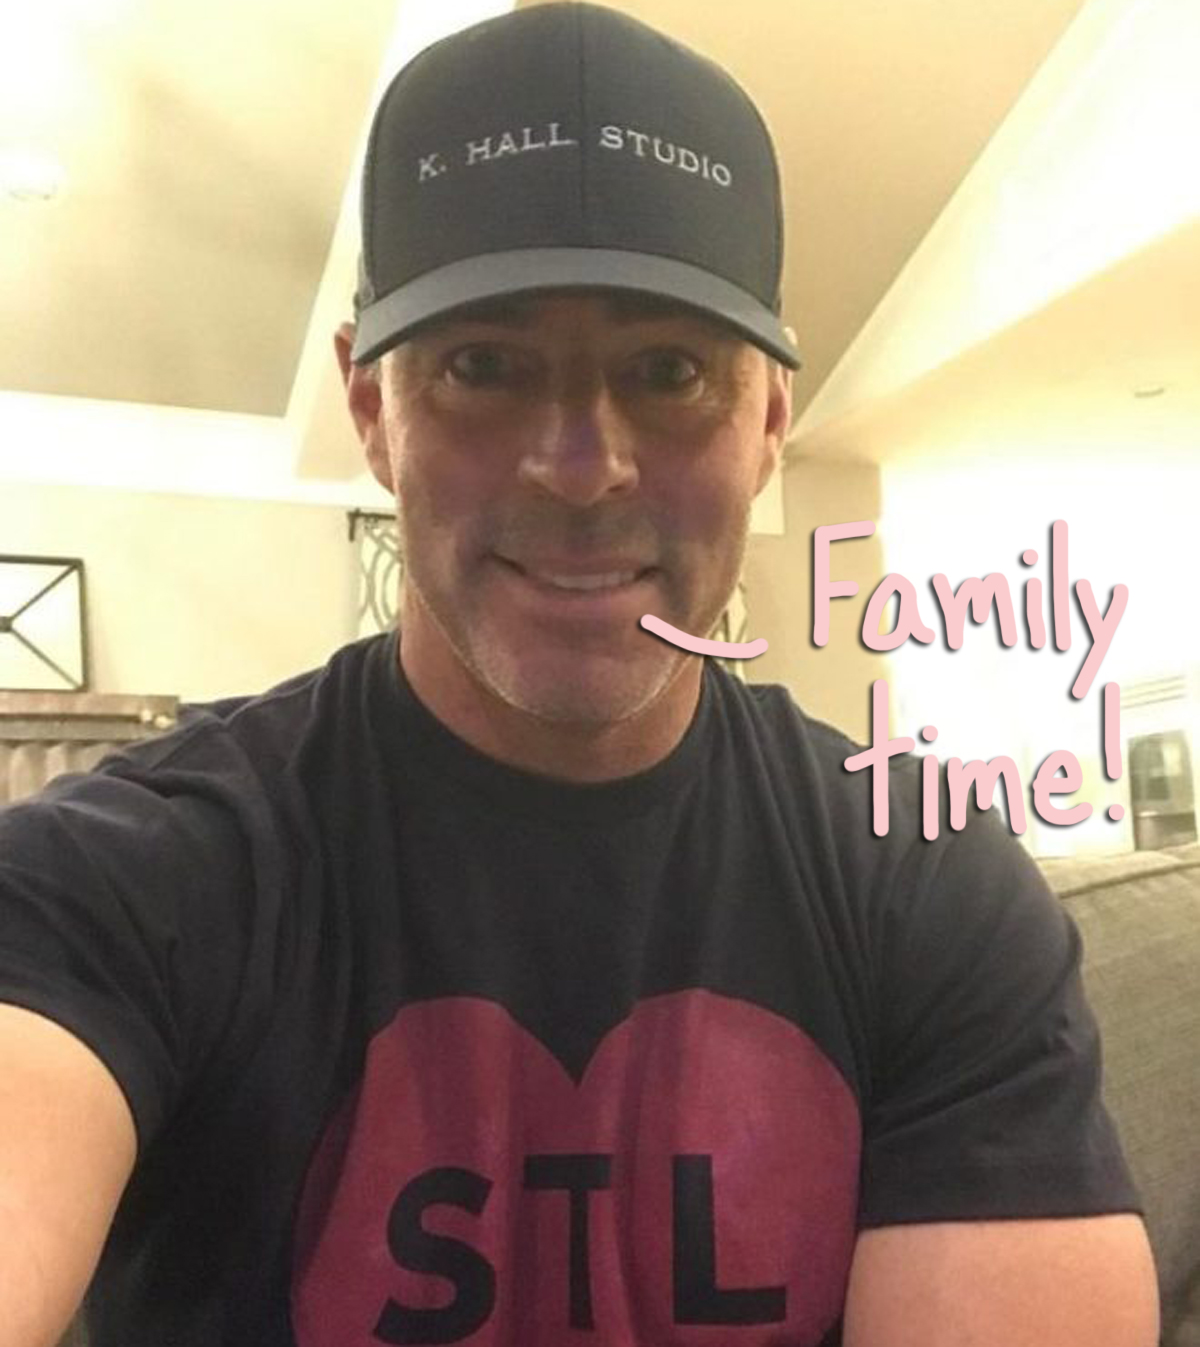 Jim Edmonds Breaks His Silence About Alleged Affair With Nanny